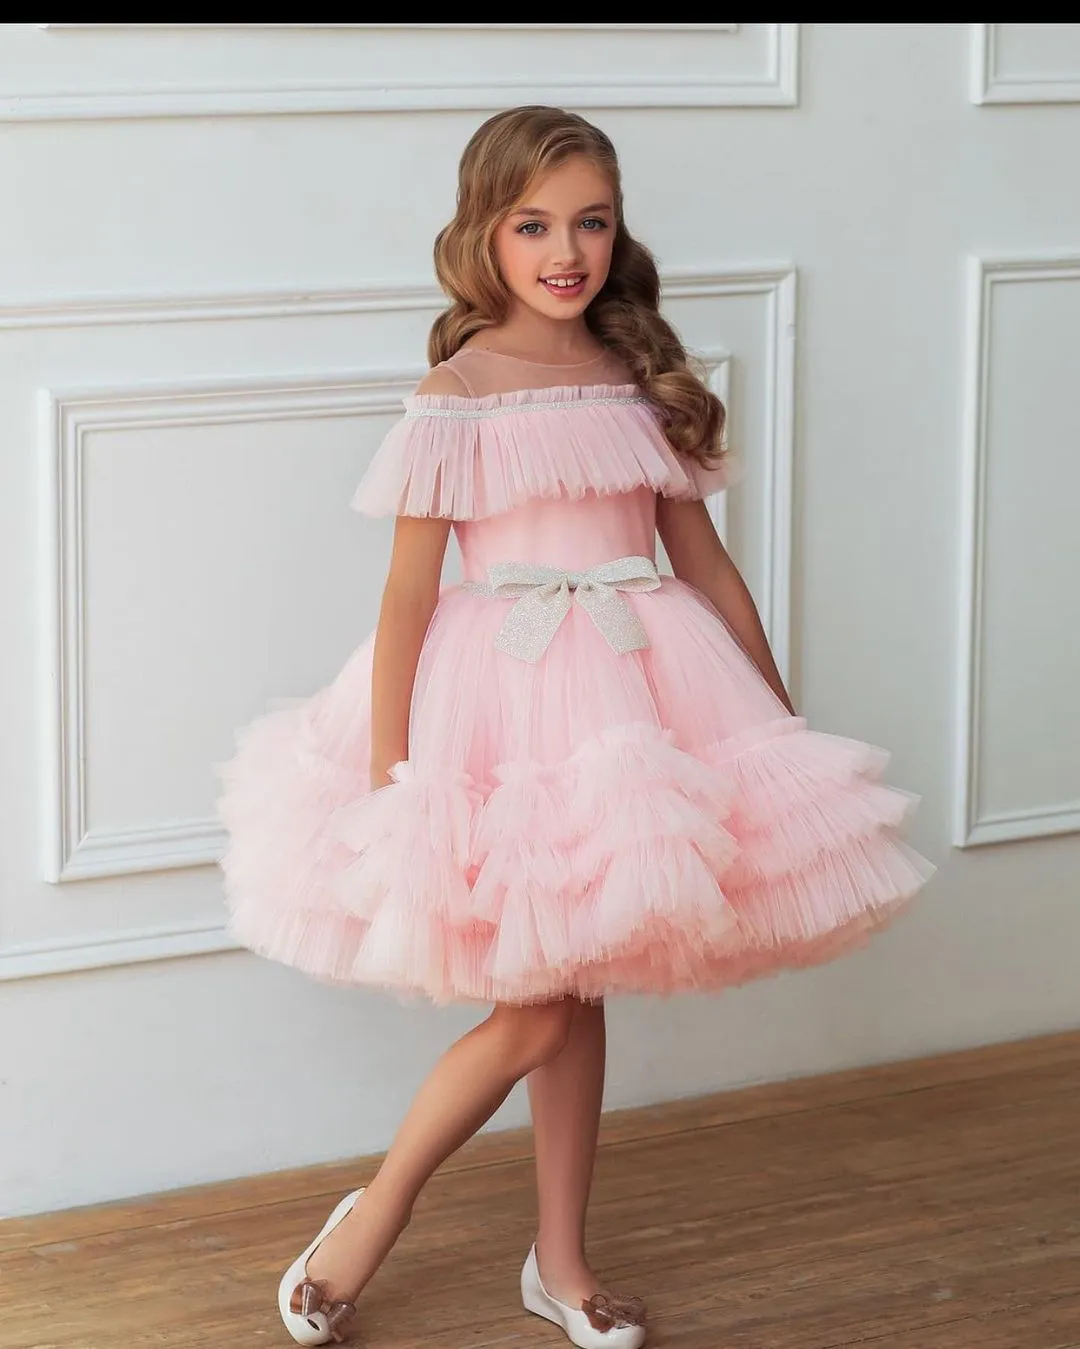 birthday girl gown - Buy birthday girl gown at Best Price in Malaysia |  h5.lazada.com.my